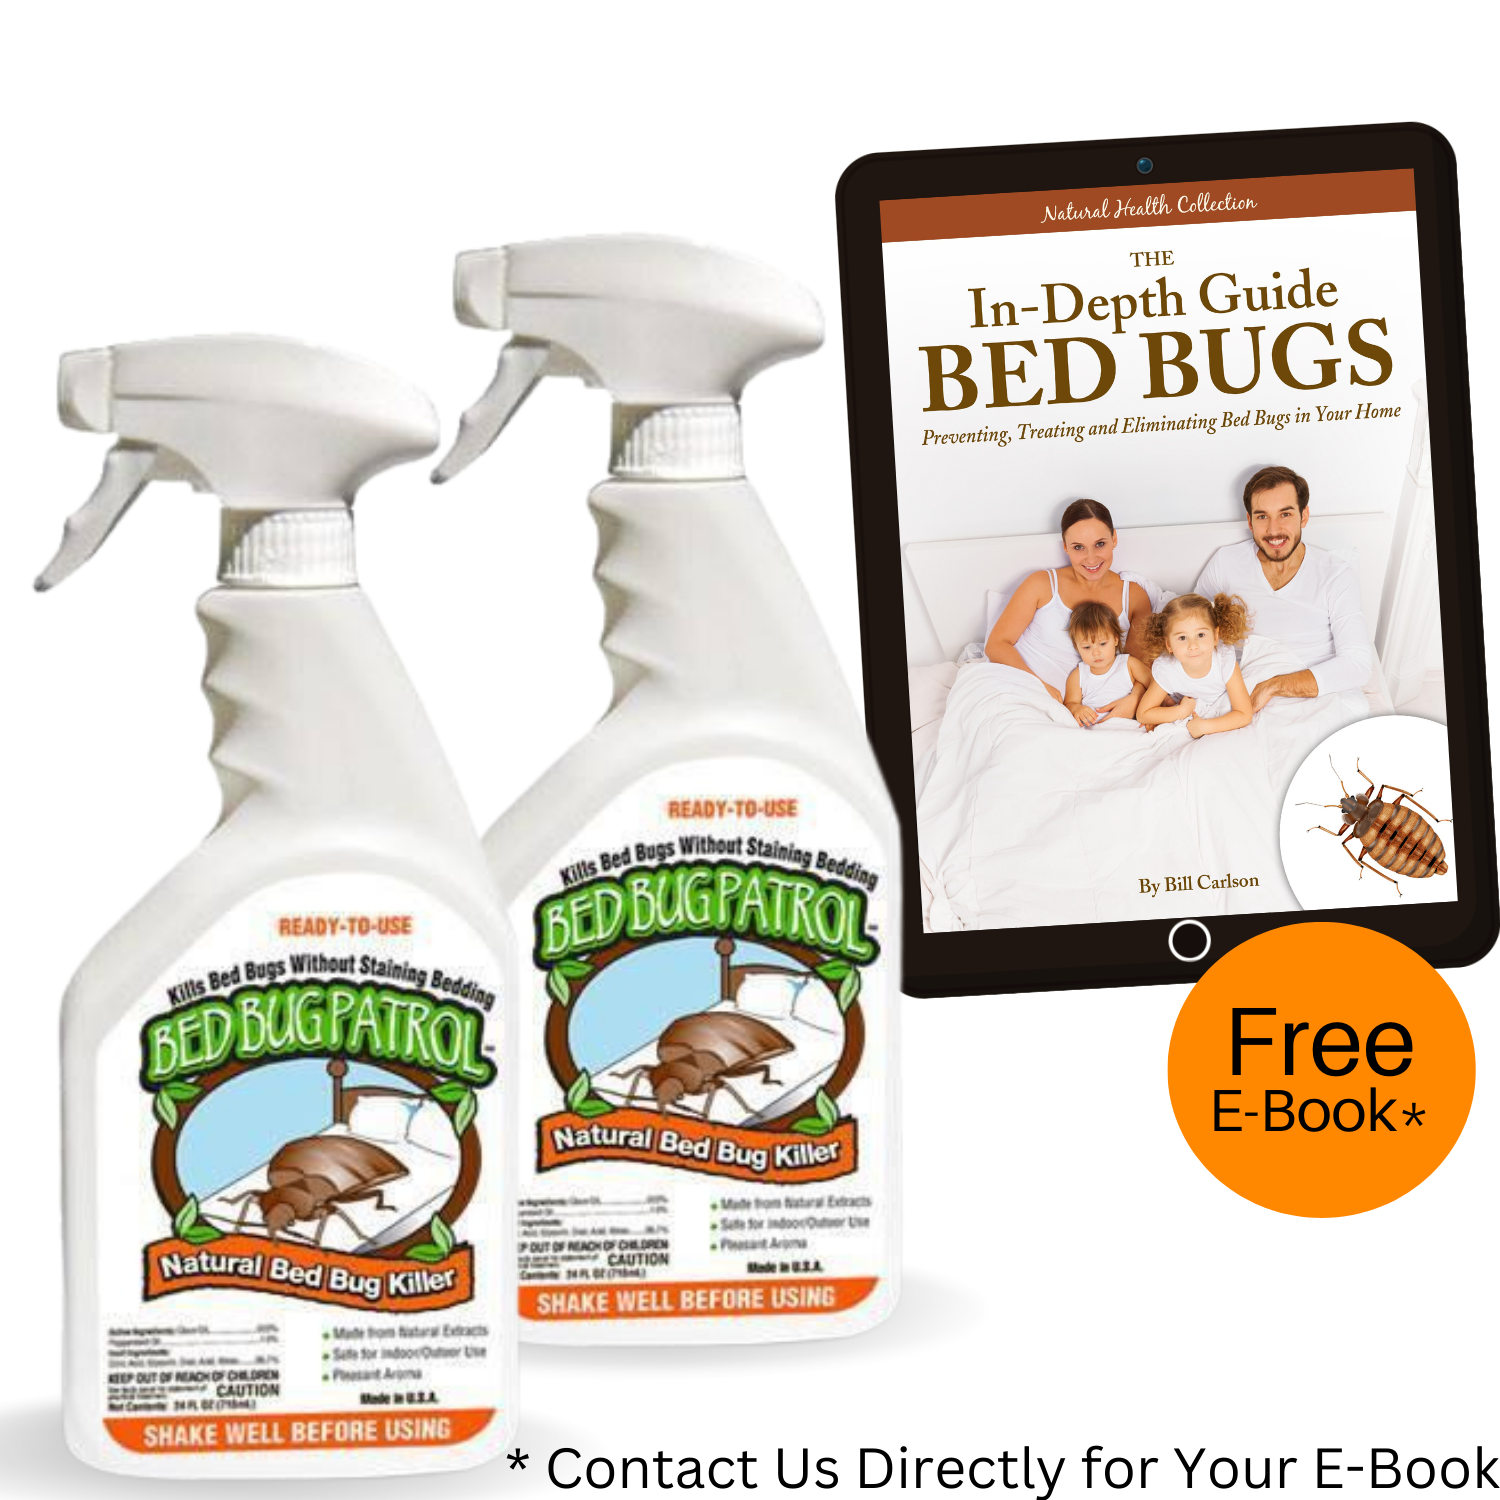 Bed Bug Patrol Bed Bug Killer Spray Treatment | 24oz (2-Pack)| Kills Bed Bugs on Contact, Natural & Non-Toxic, Child & Pet Safe. Recommended for Home, Mattress & Furniture.